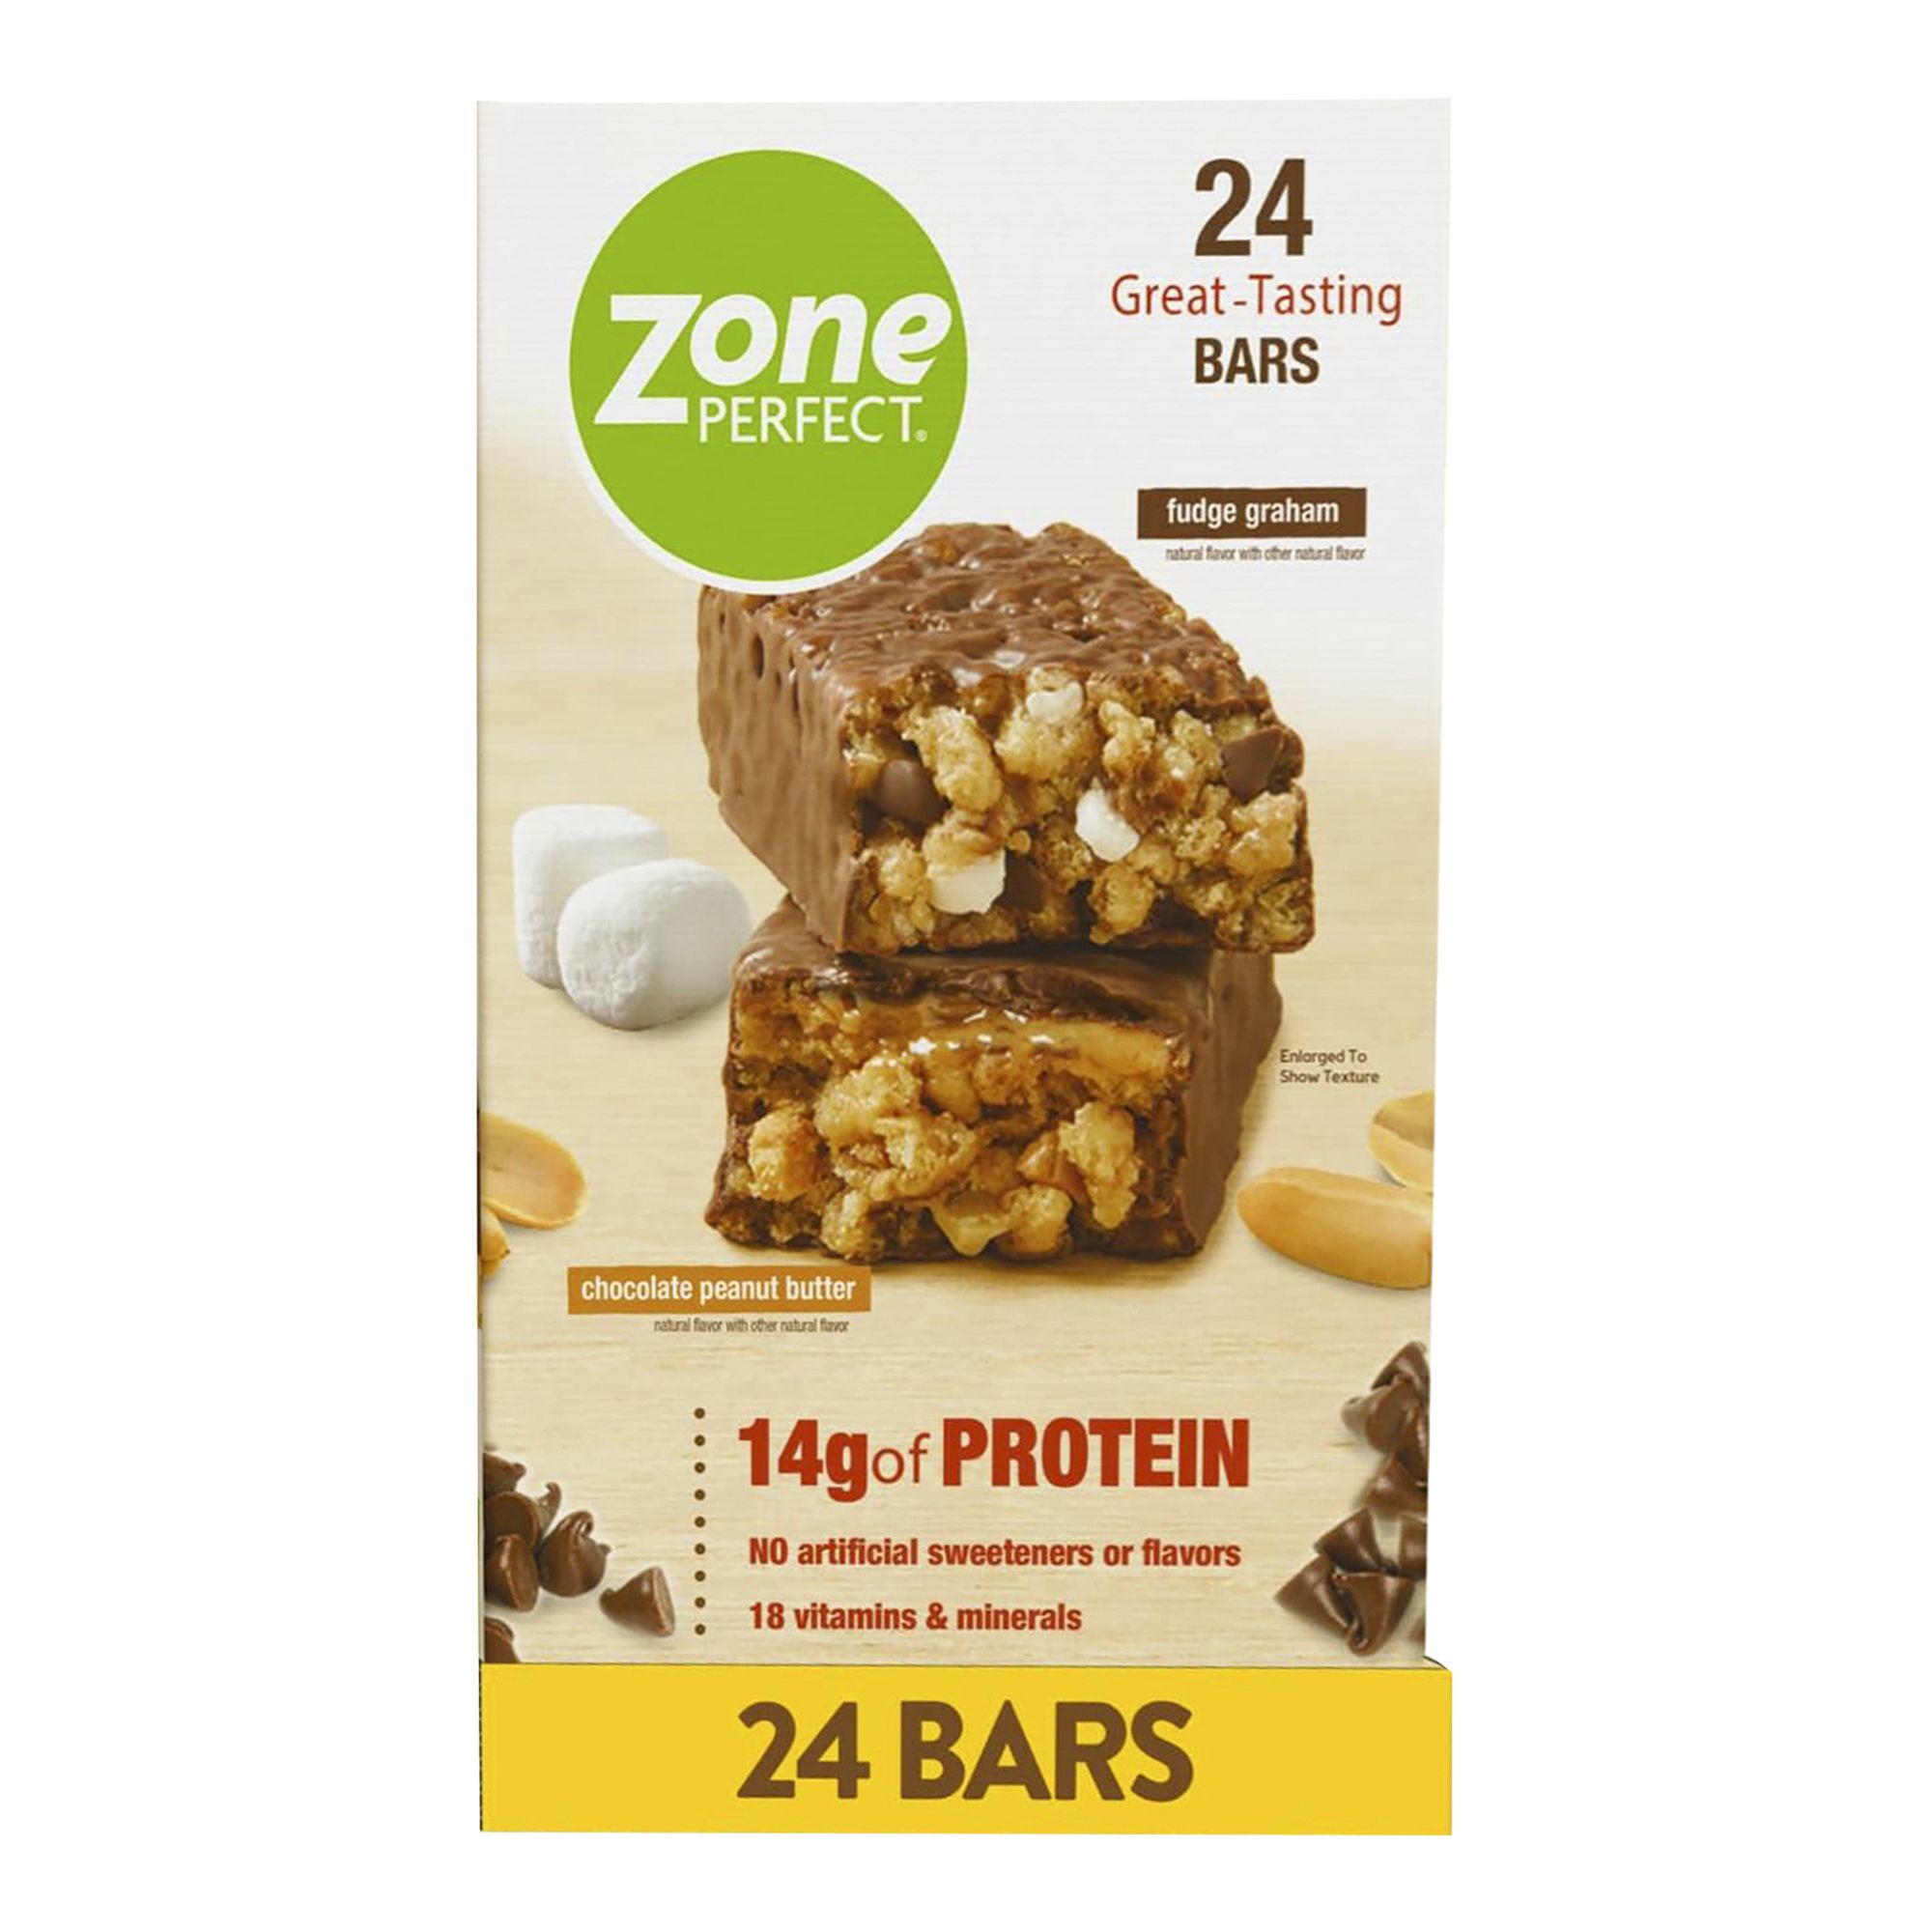 ZonePerfect Protein Bar Fudge Graham and Chocolate Peanut Butter Bars, 24 ct.